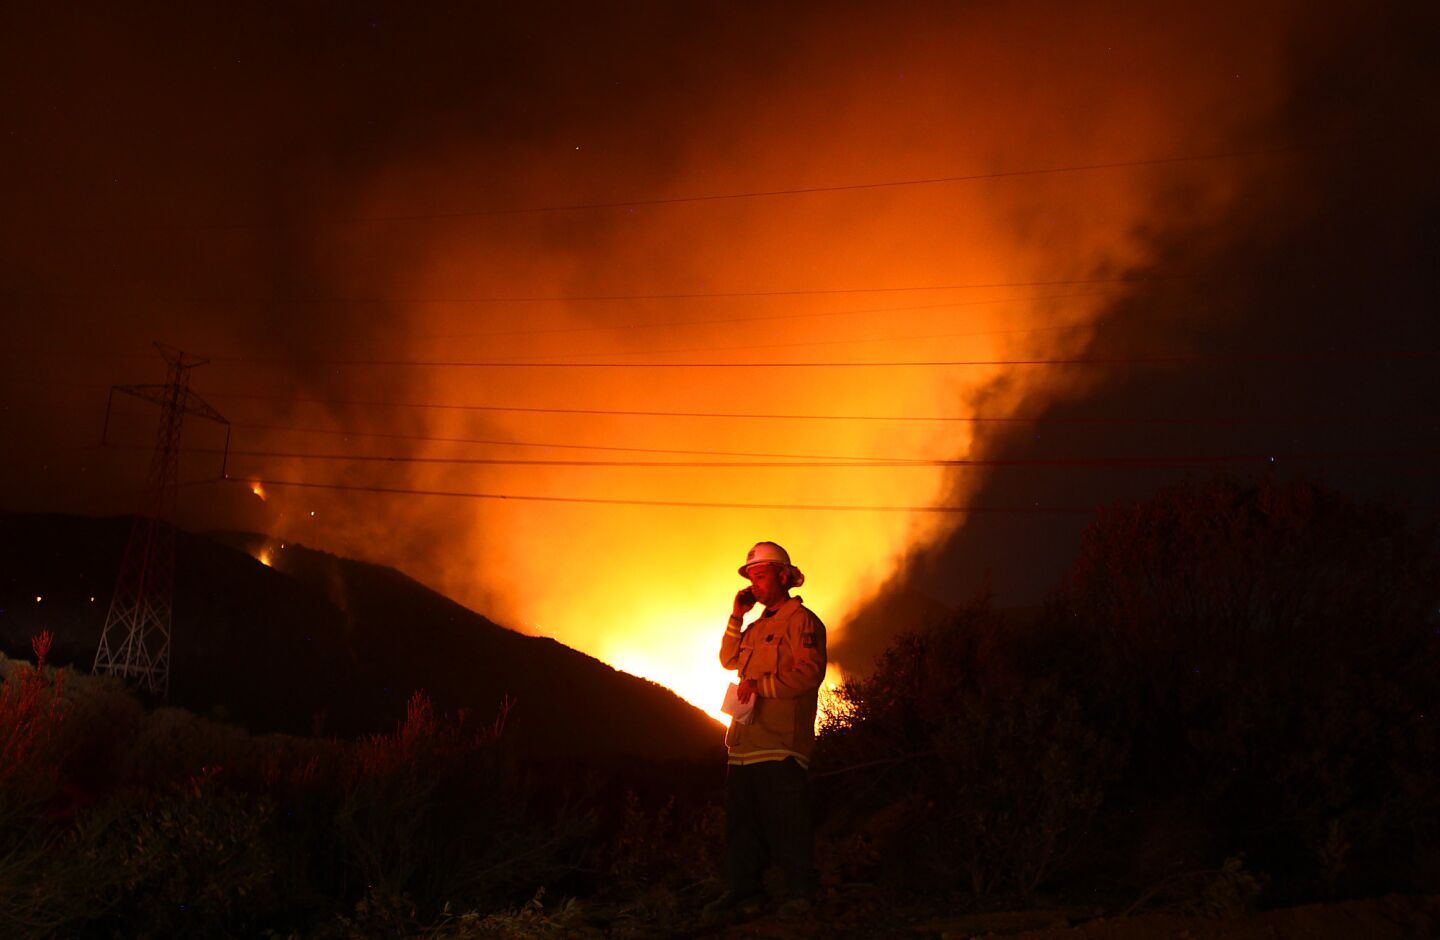 Nathan Judy, a U.S. Forest Service fire information officer, talks on a satellite phone as flames from the Powerhouse fire burn along San Francisquito Canyon Road in the Angeles National Forest.